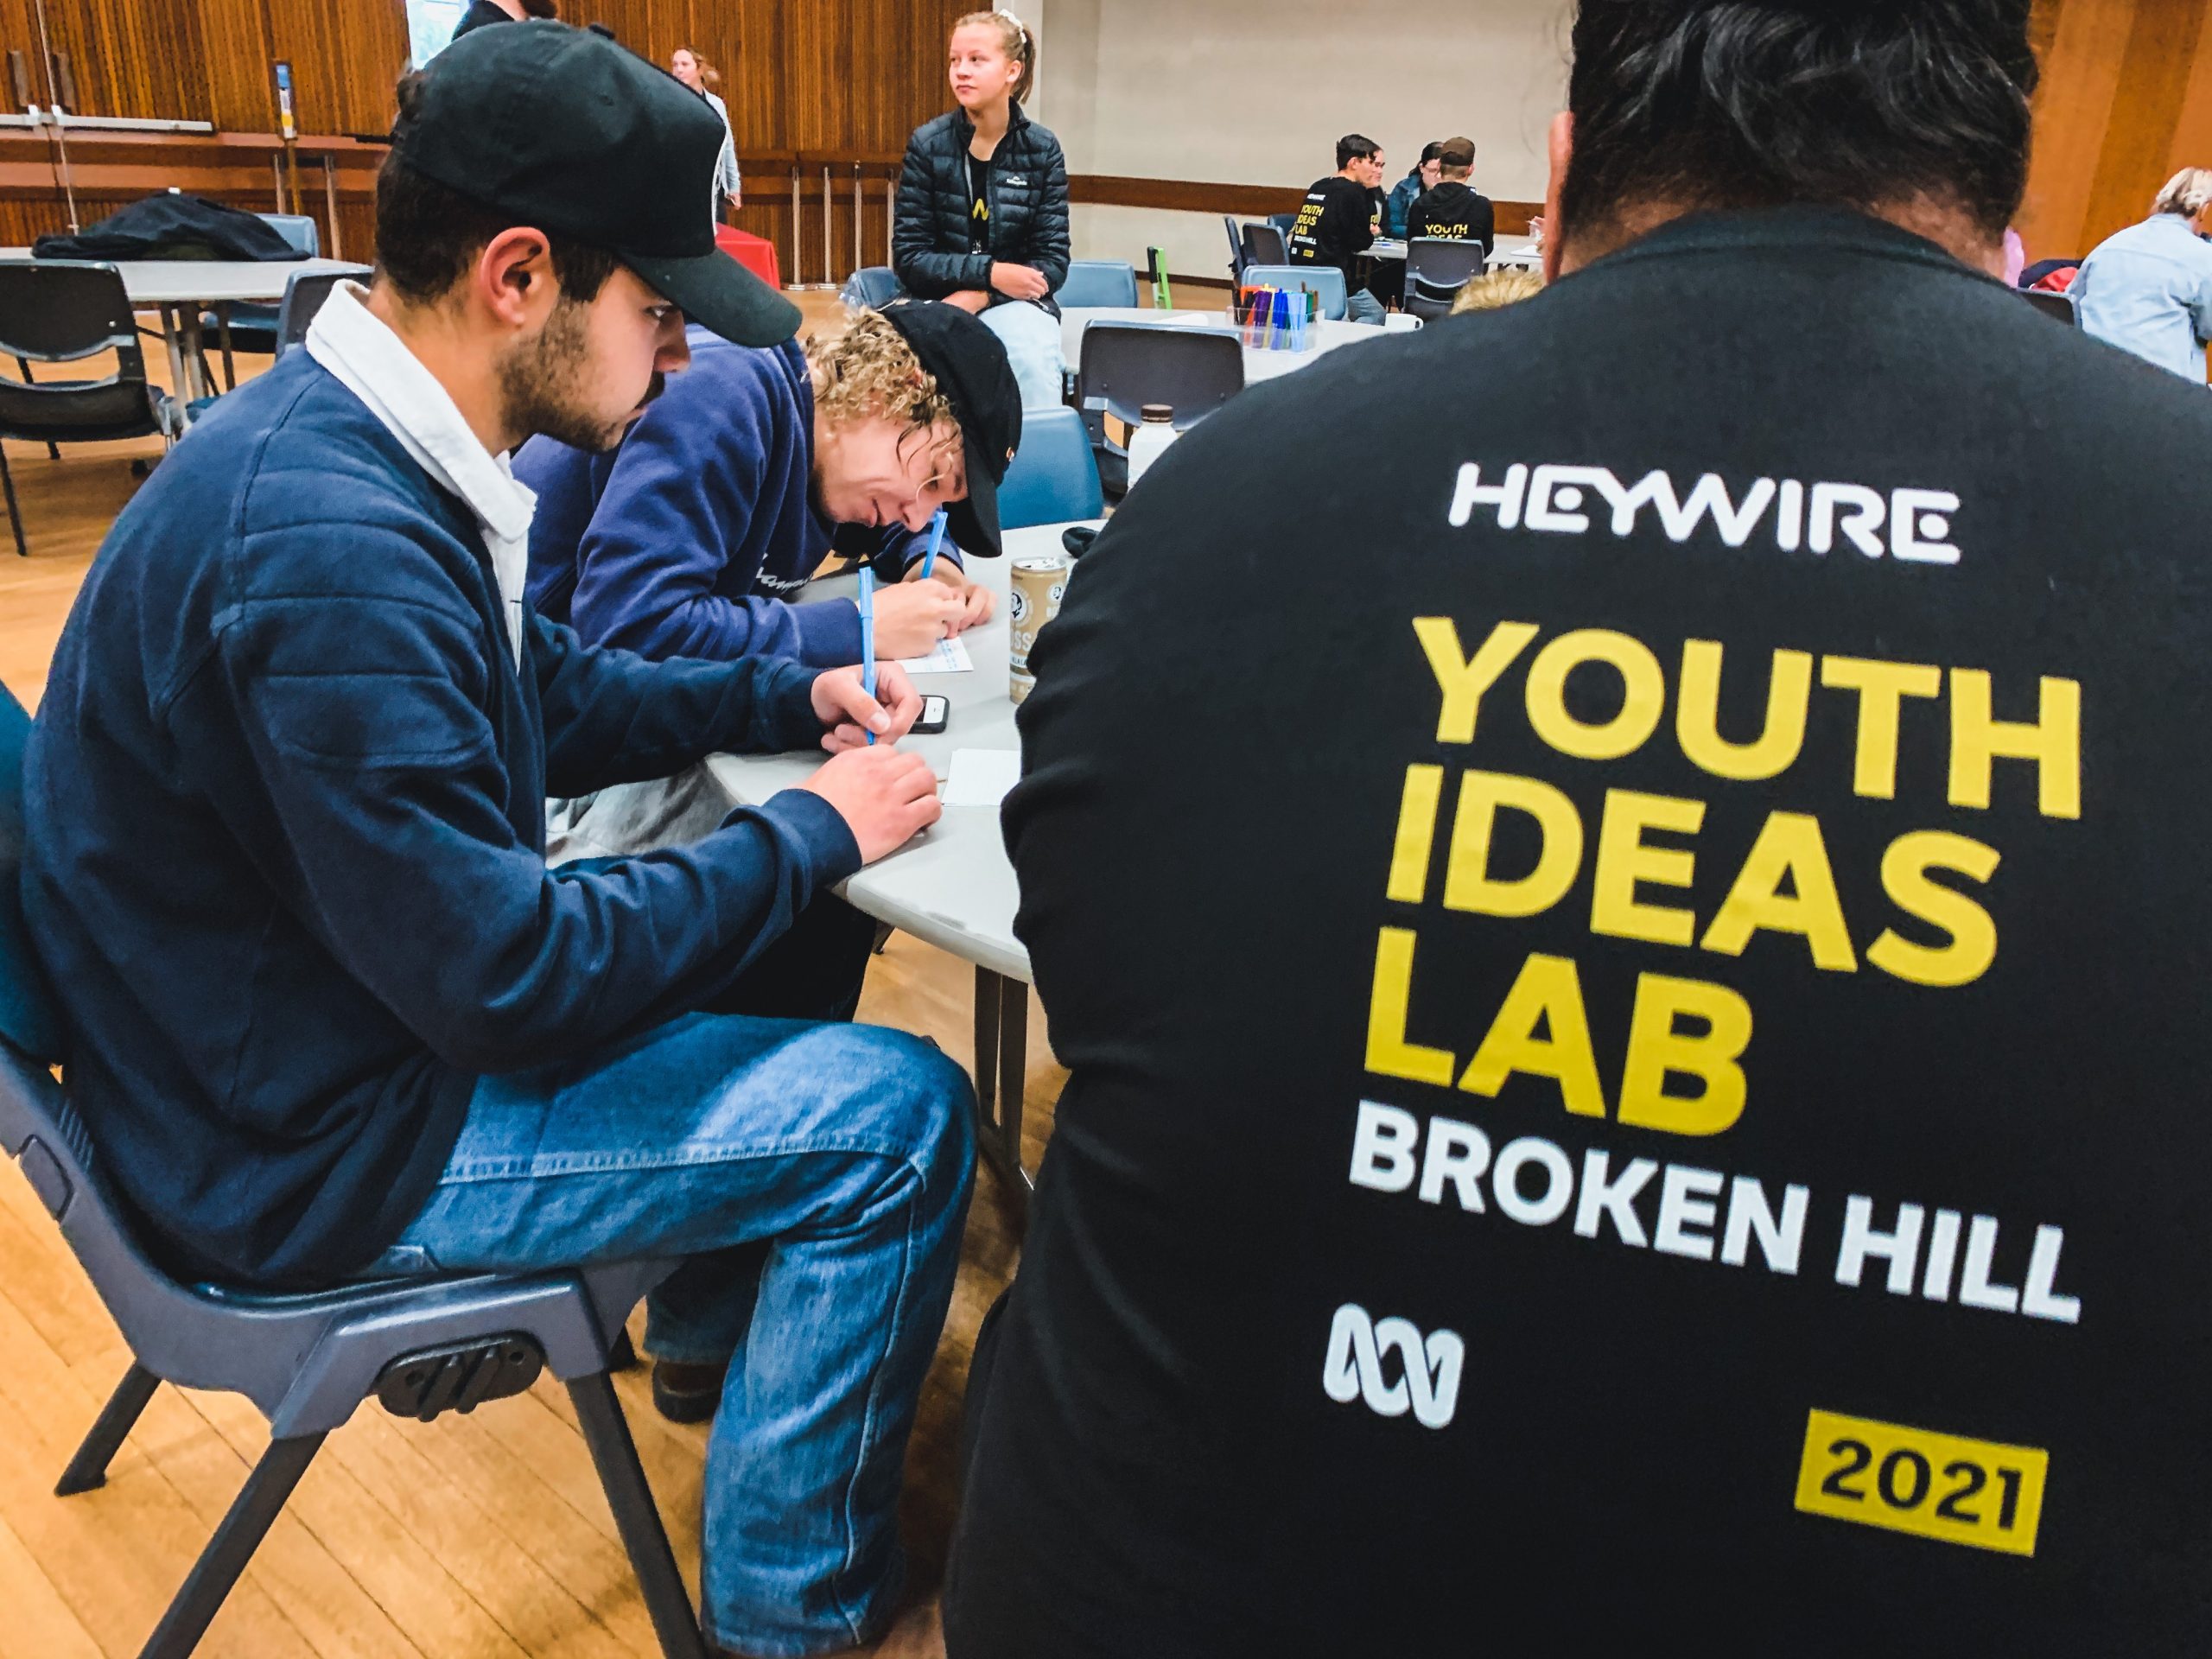 2021 Heywire Youth Ideas Lab at Broken Hill